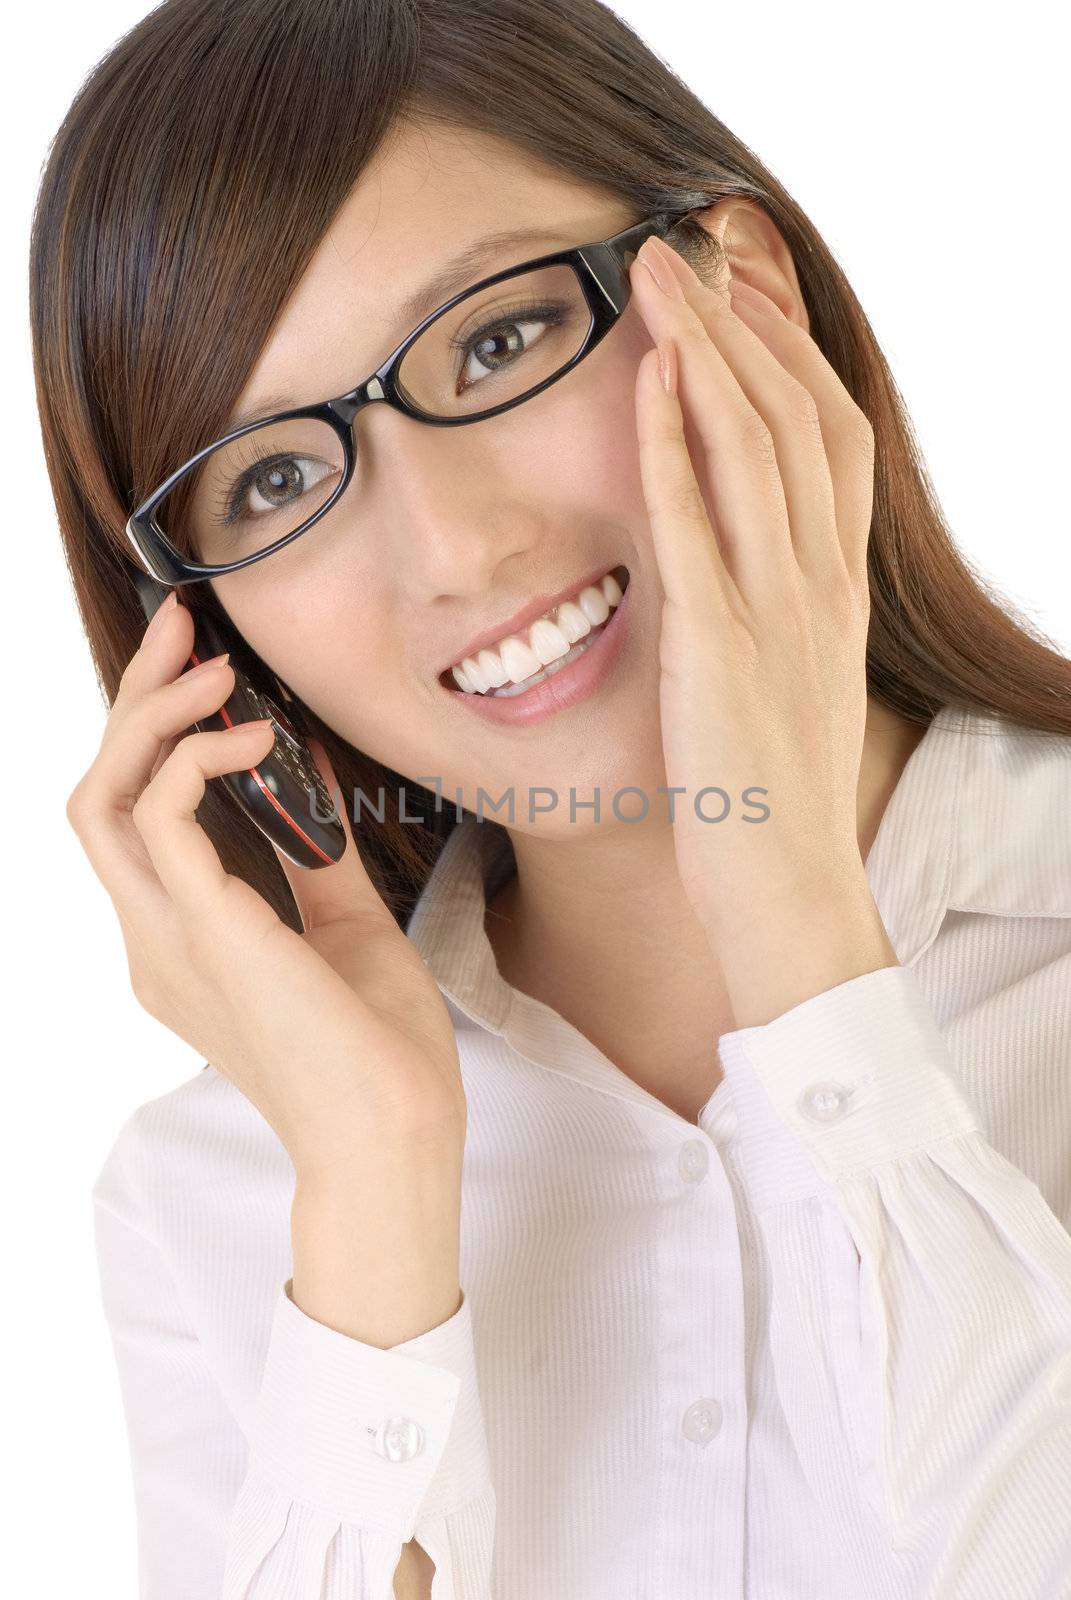 Business woman talking on cellphone and smile on white background.